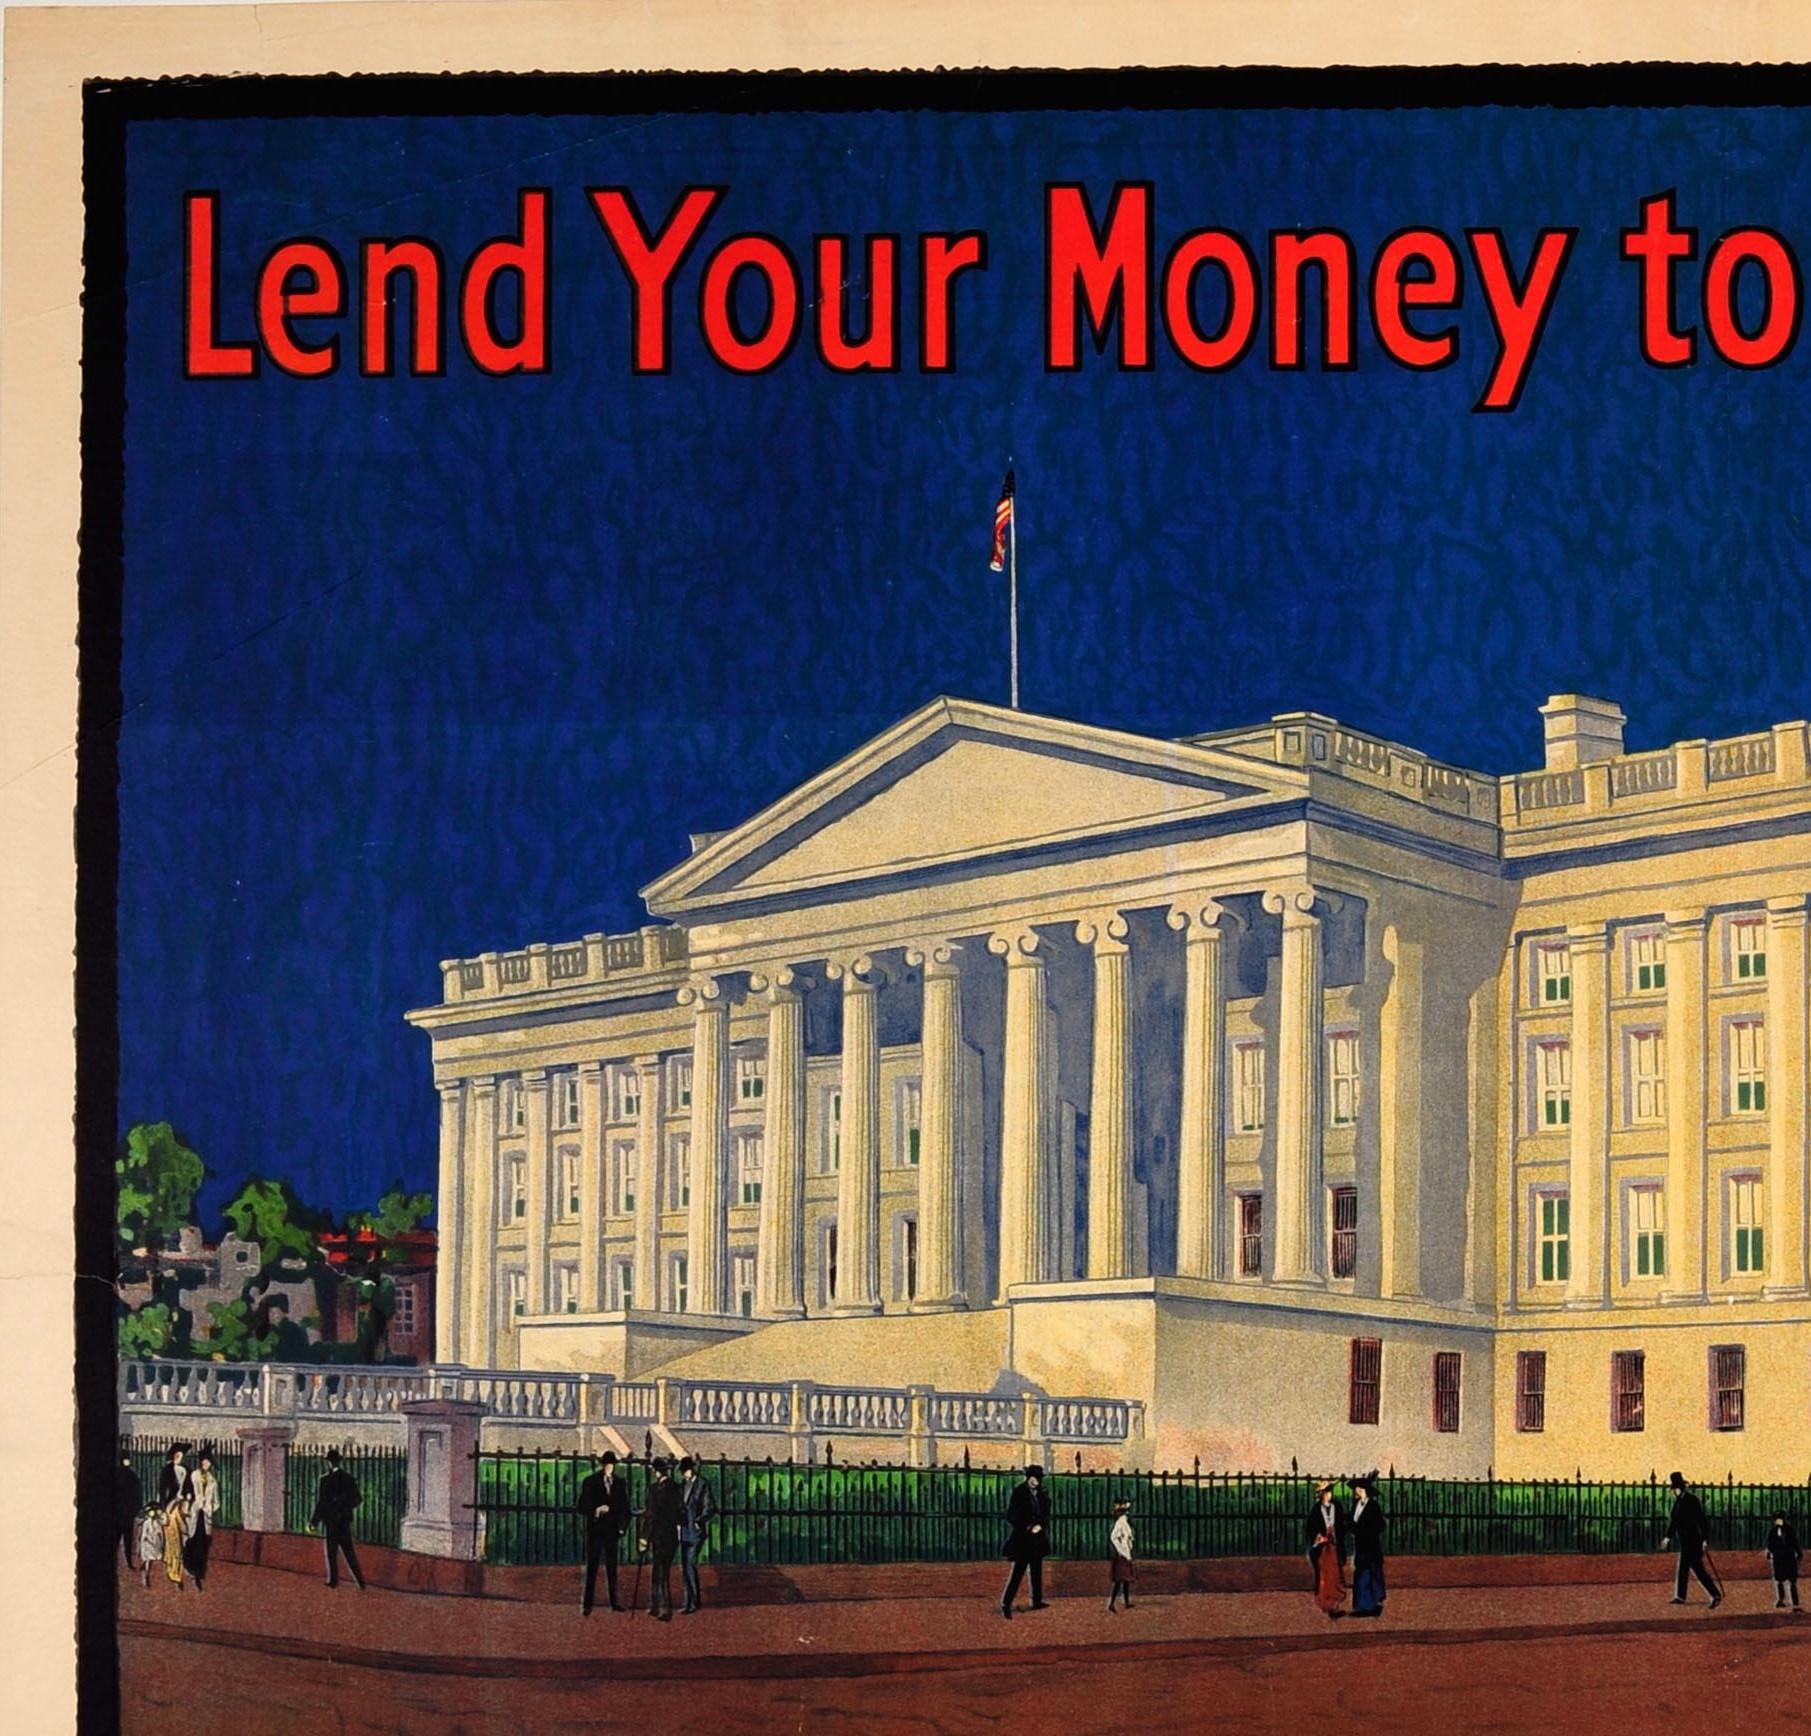 Original antique World War One propaganda poster for the Second Liberty Loan of 1917 featuring a great image of a classic car and people in suits and dresses walking outside the Treasury Building in Washington, D.C. with American flags flying